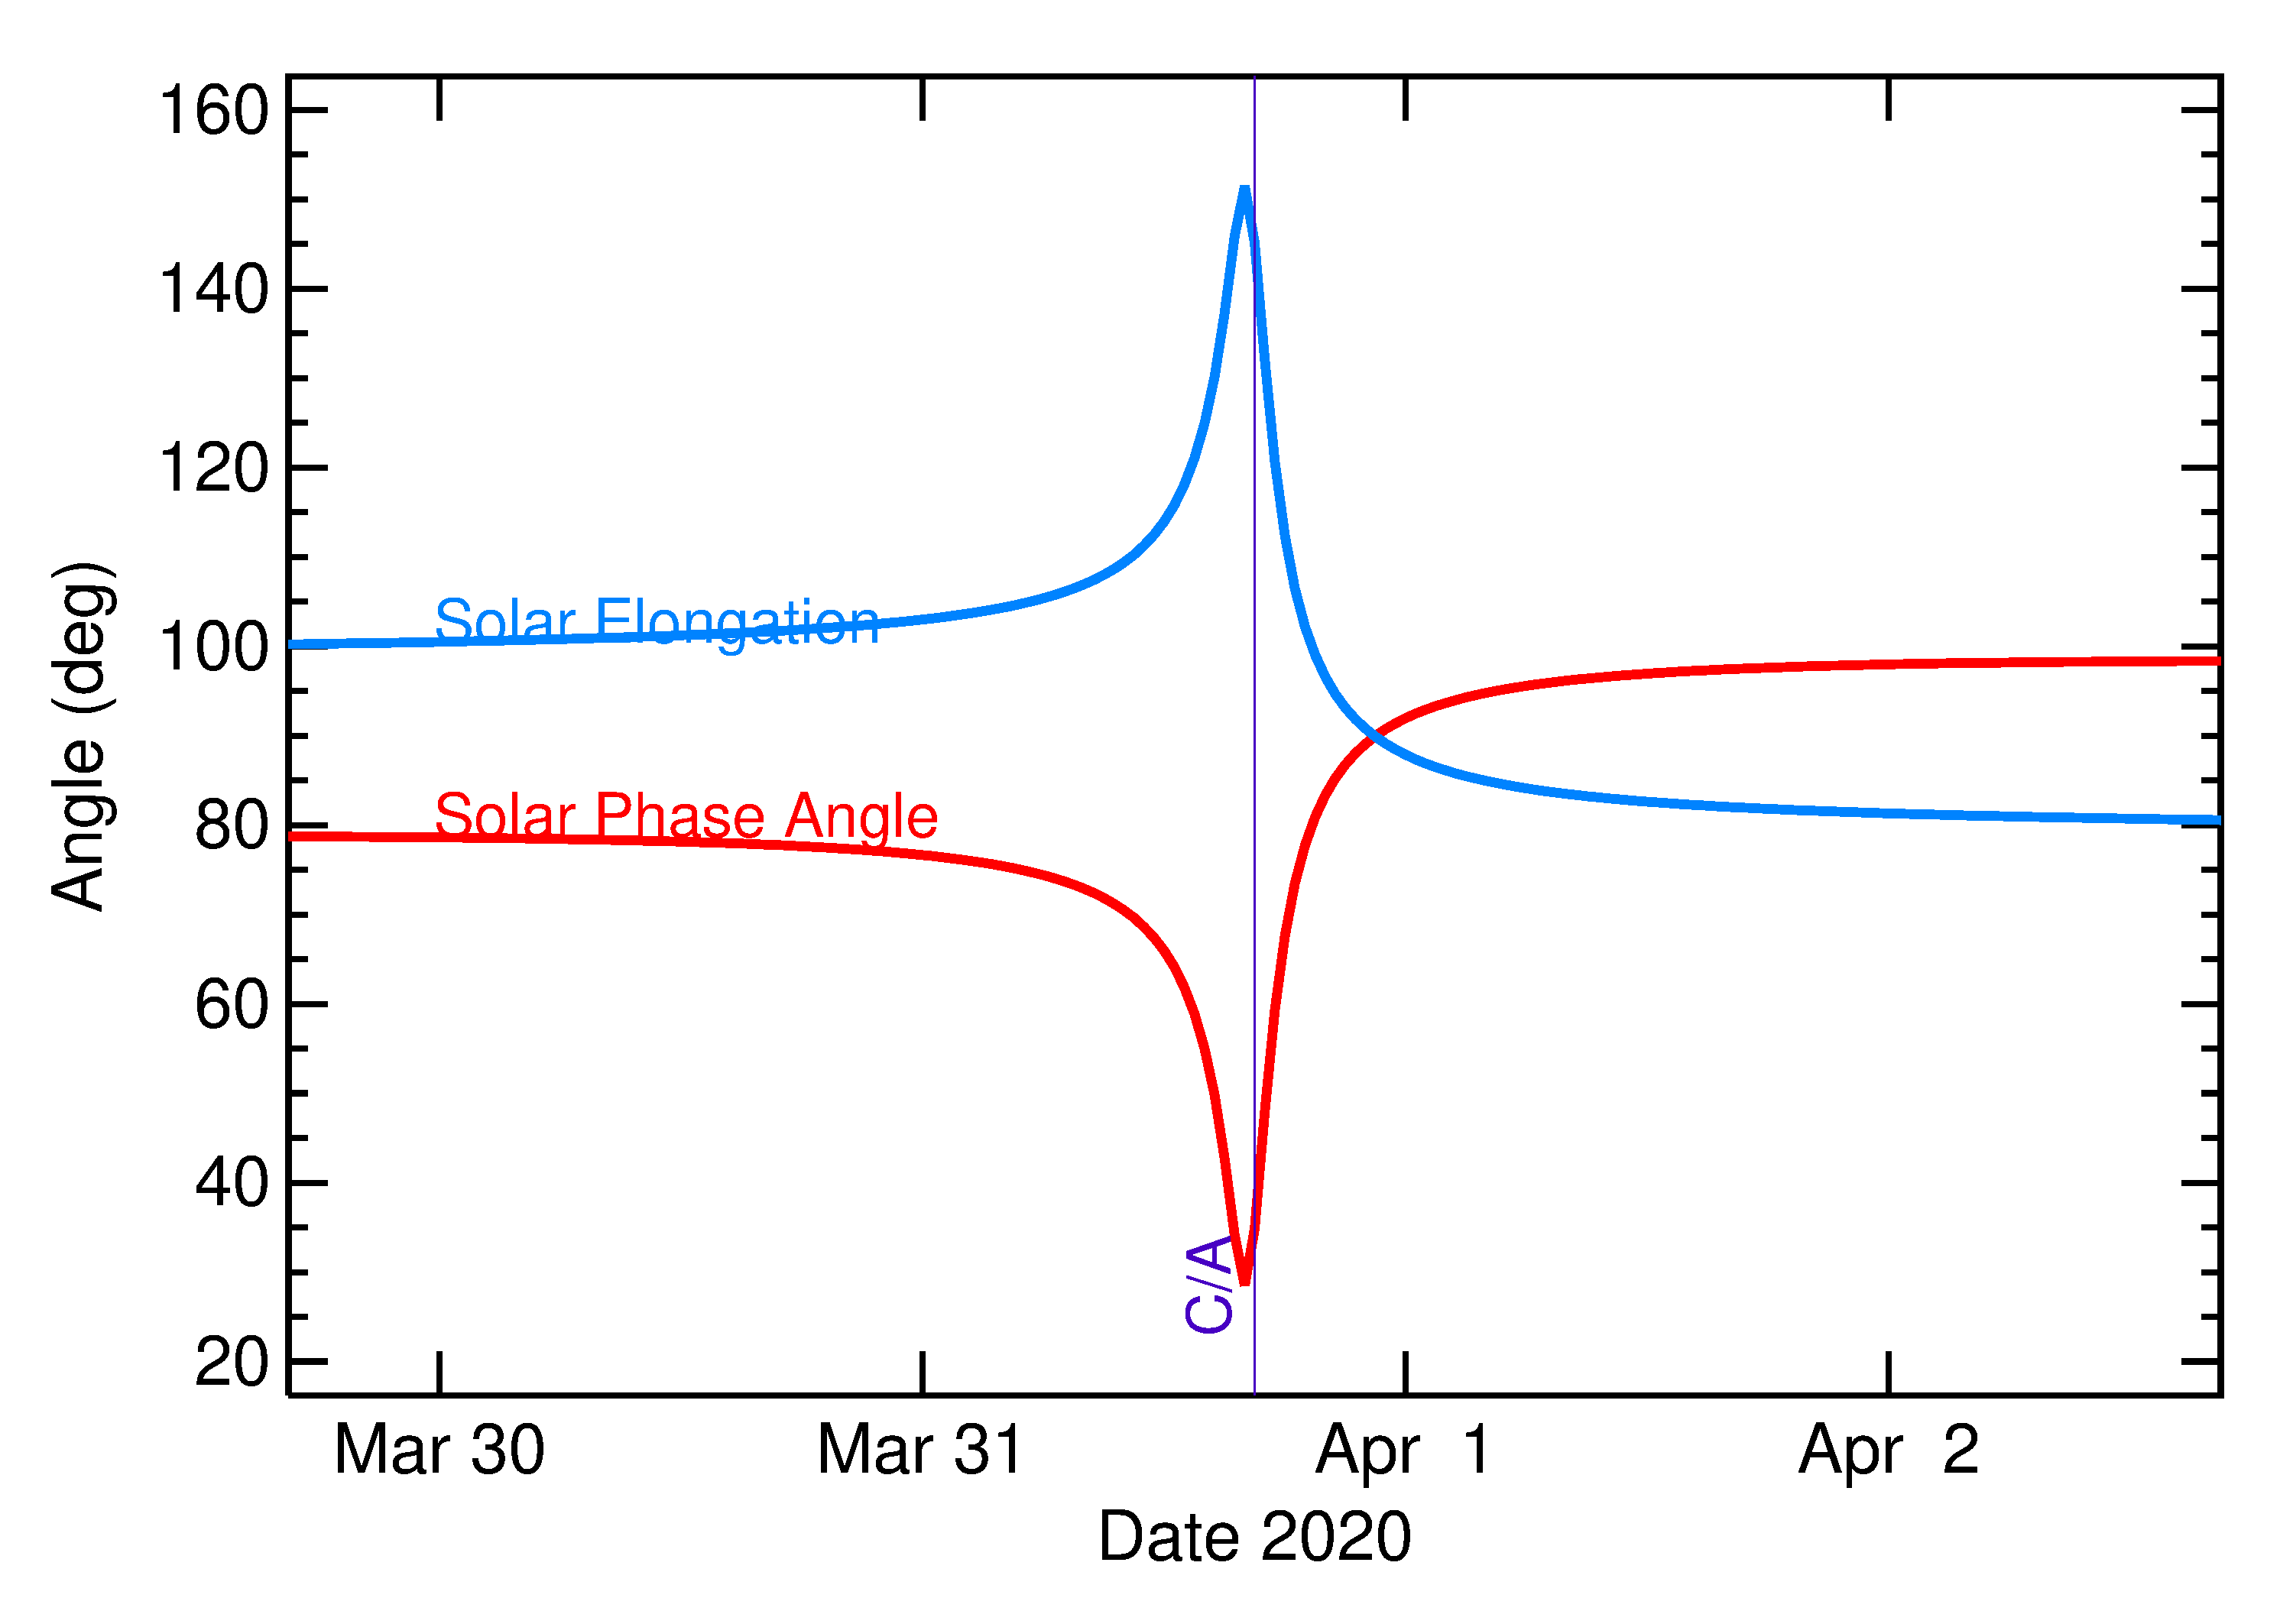 Solar Elongation and Solar Phase Angle of 2020 FB7 in the days around closest approach